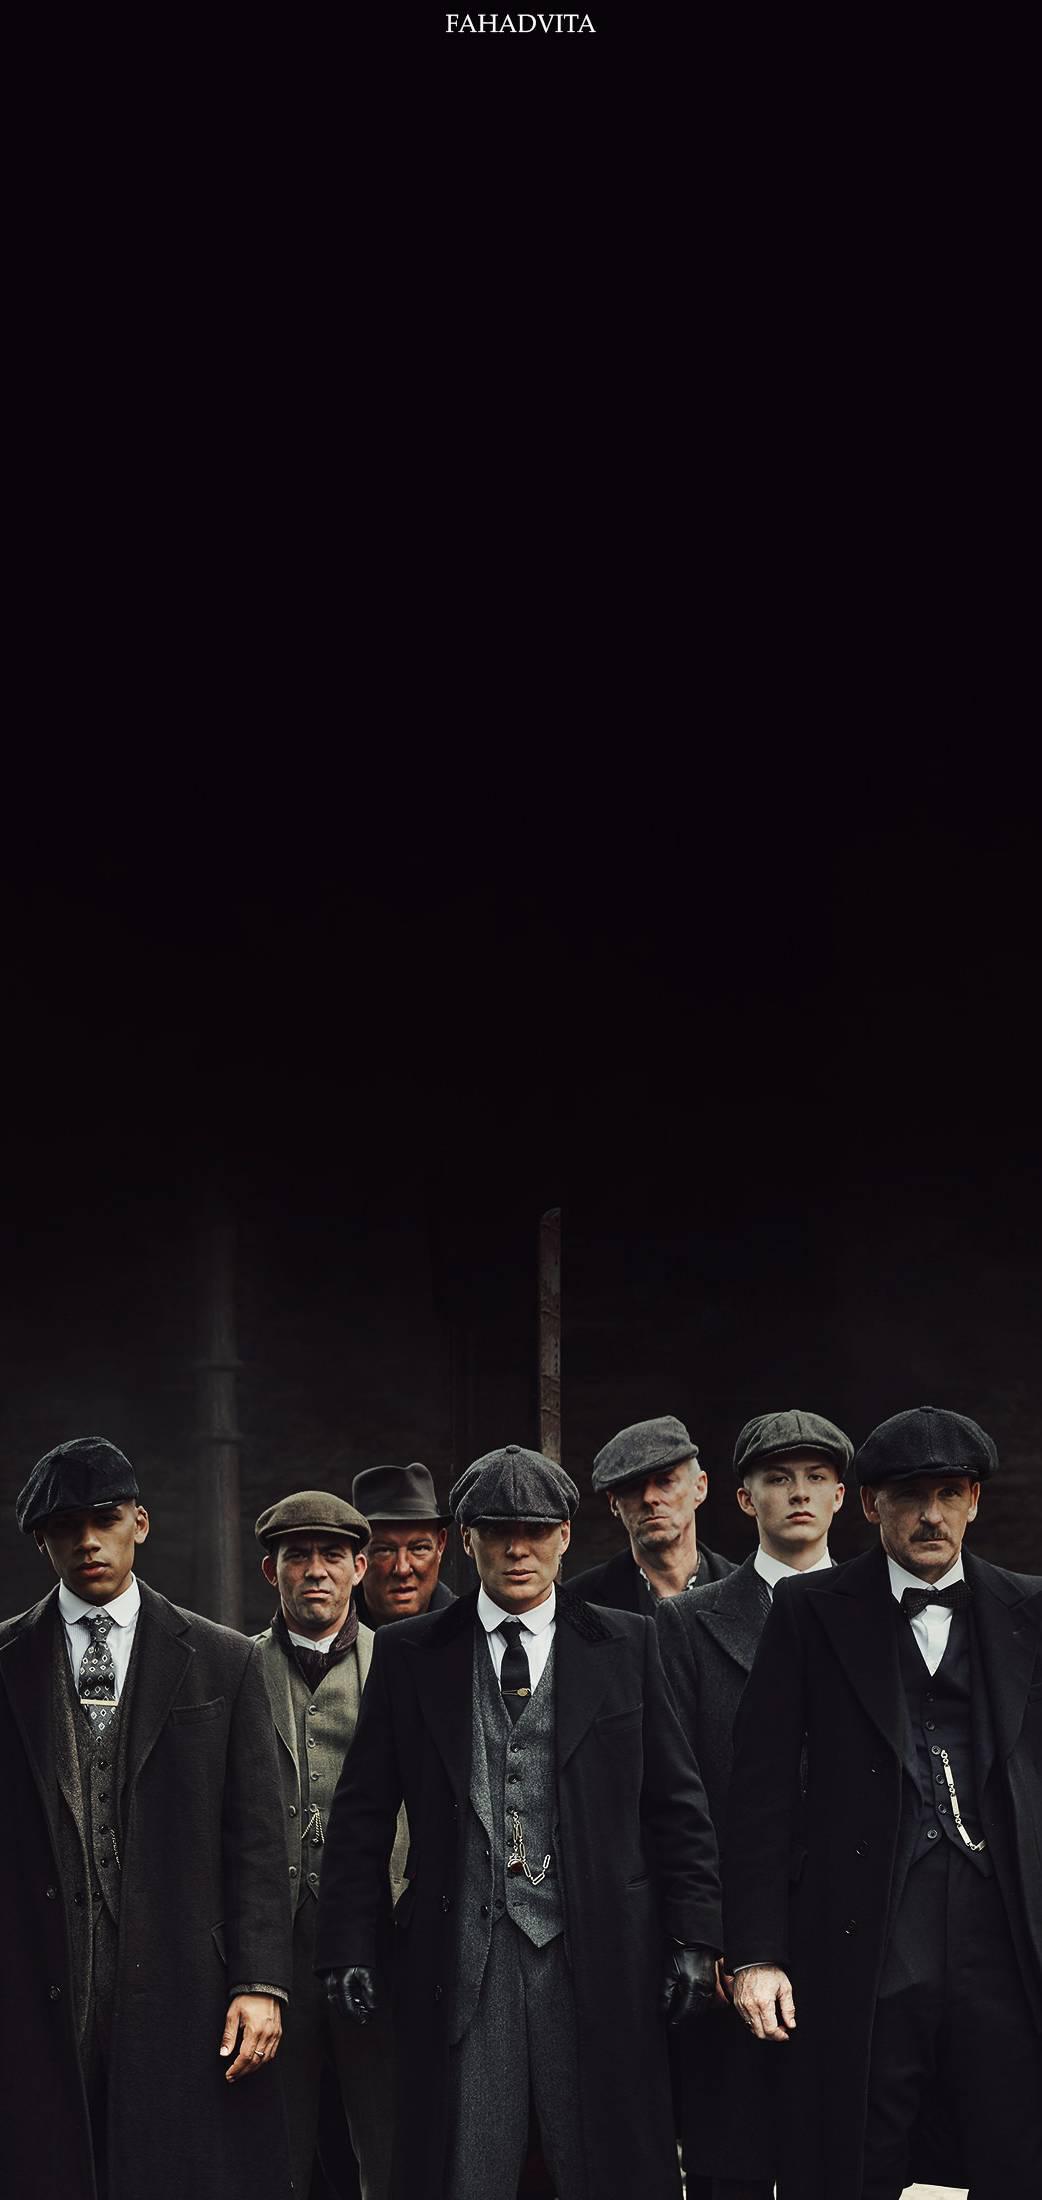 A Cool Wallpaper I Found R Peakyblinders